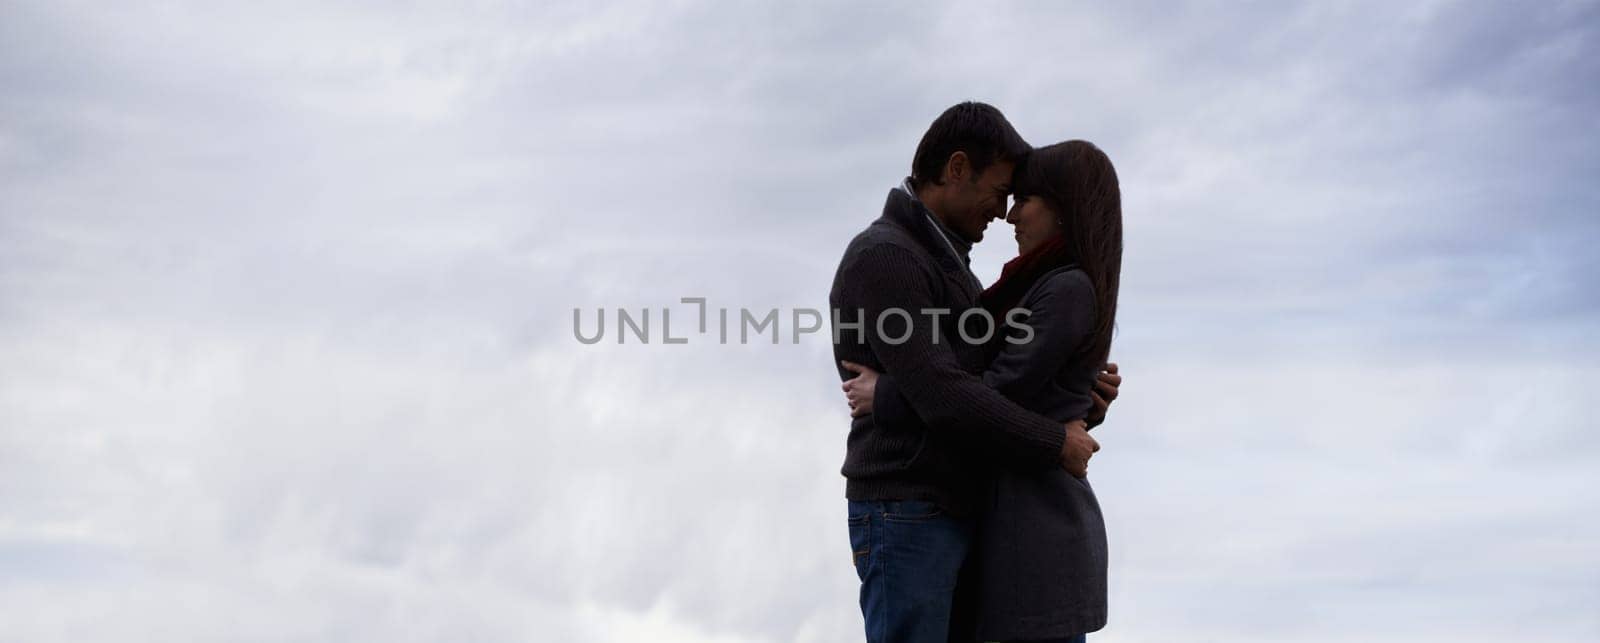 Couple, sky and hug together with love for romance, commitment and care for feeling safe. Man, woman and relationship with mockup, space and banner outdoors on honeymoon with spouse comfort and trust.